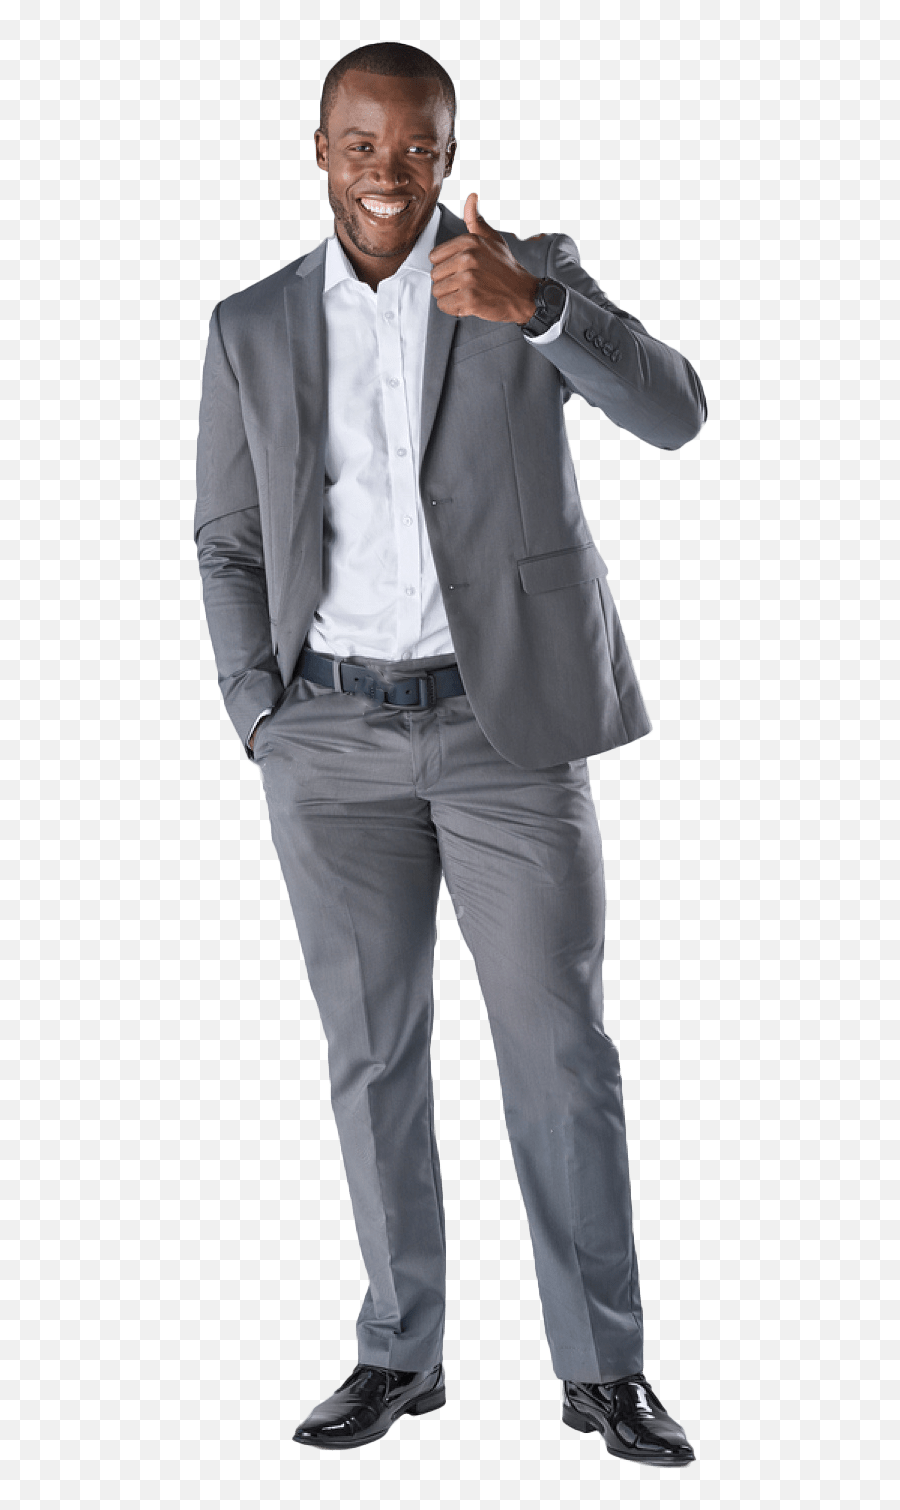 Business Man - Stock Photo Smiling Happy African Black African Business Man Png Emoji,Business Man Png